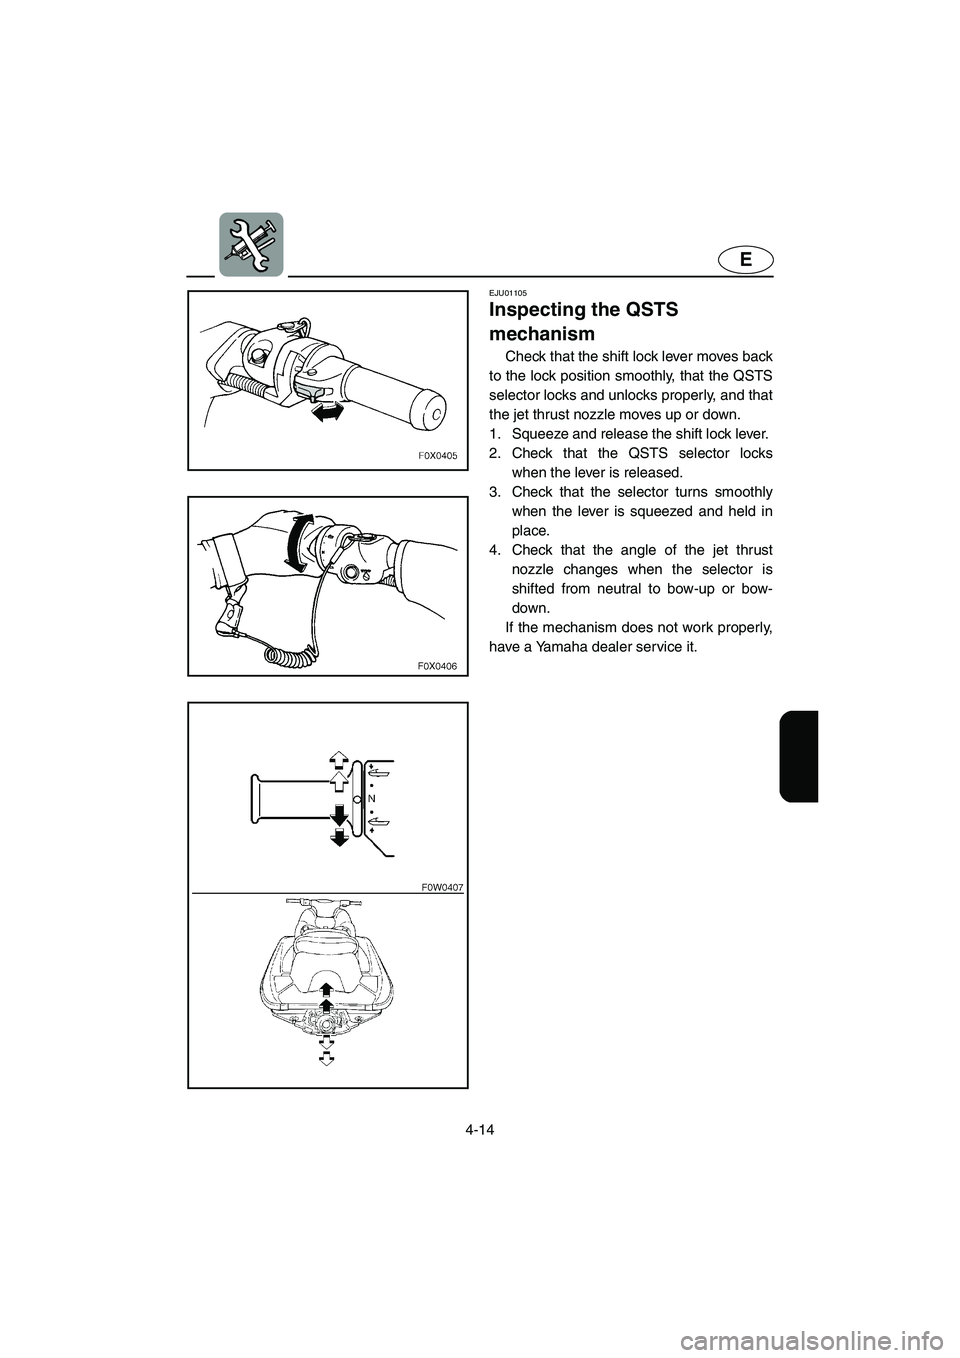 YAMAHA GP800R 2002  Owners Manual 4-14
E
EJU01105 
Inspecting the QSTS 
mechanism  
Check that the shift lock lever moves back
to the lock position smoothly, that the QSTS
selector locks and unlocks properly, and that
the jet thrust n